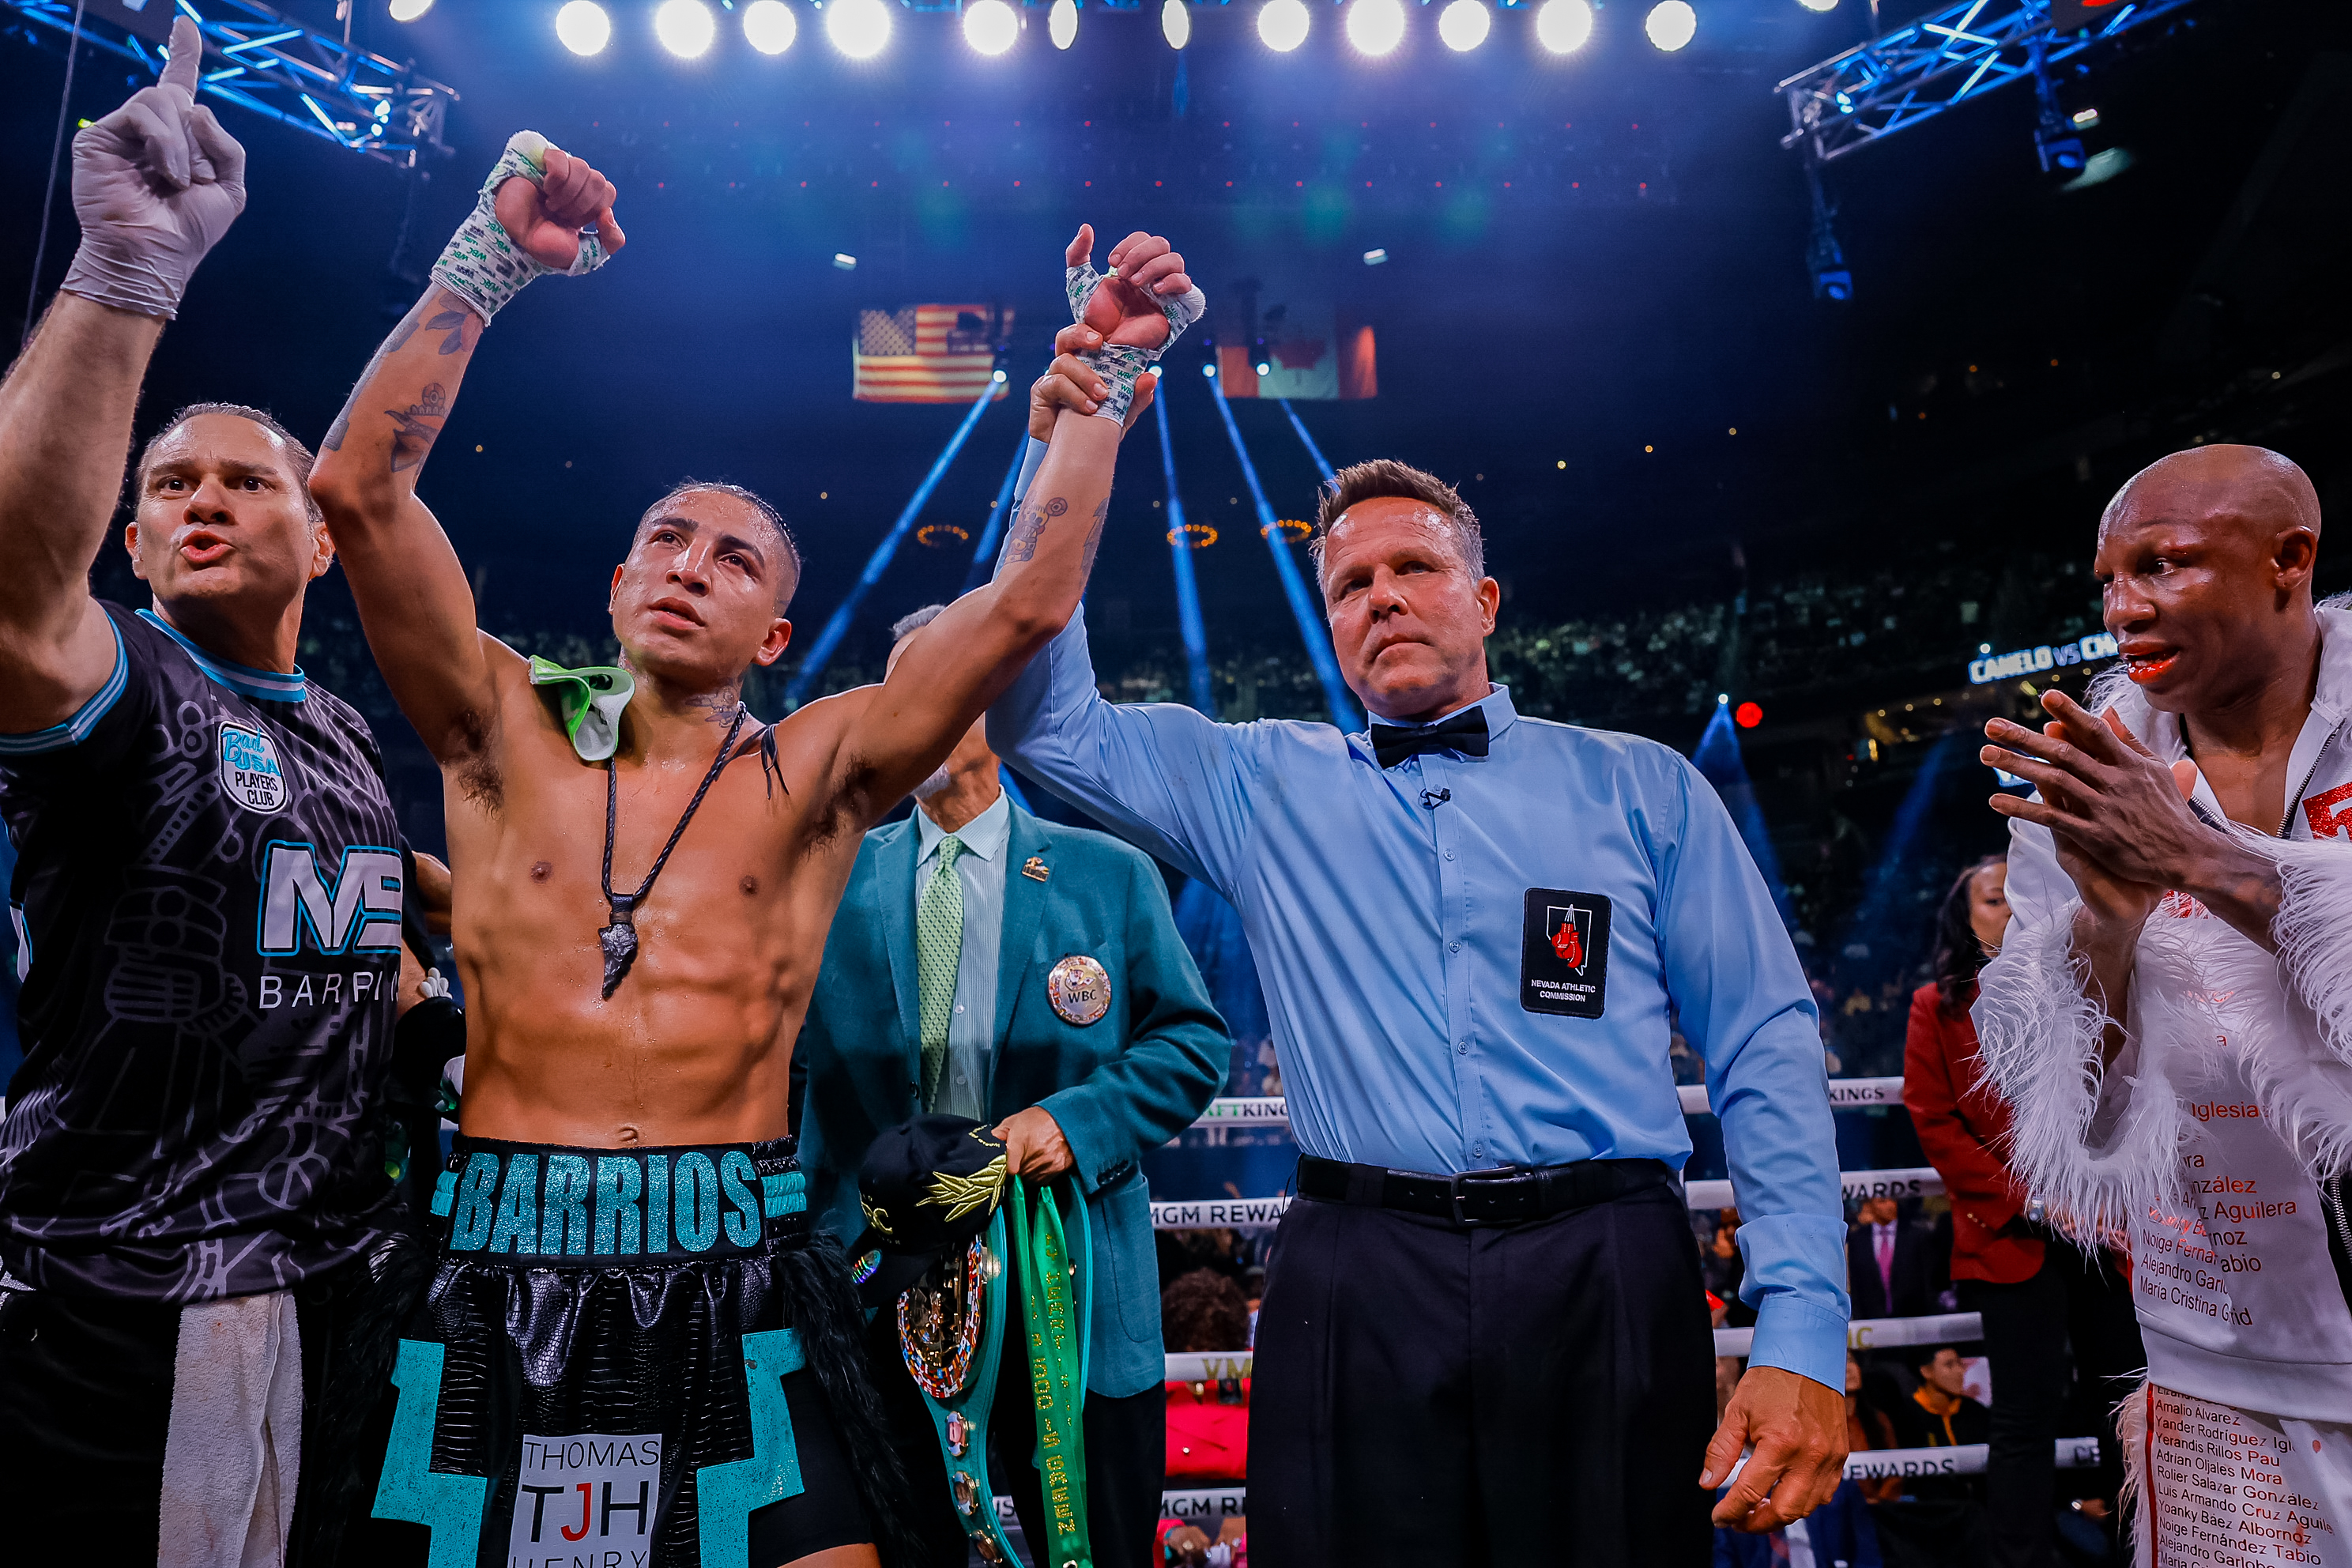 INSIDE THE RING Mario Barrios shines as he wins welterweight title belt on Showtime PPV